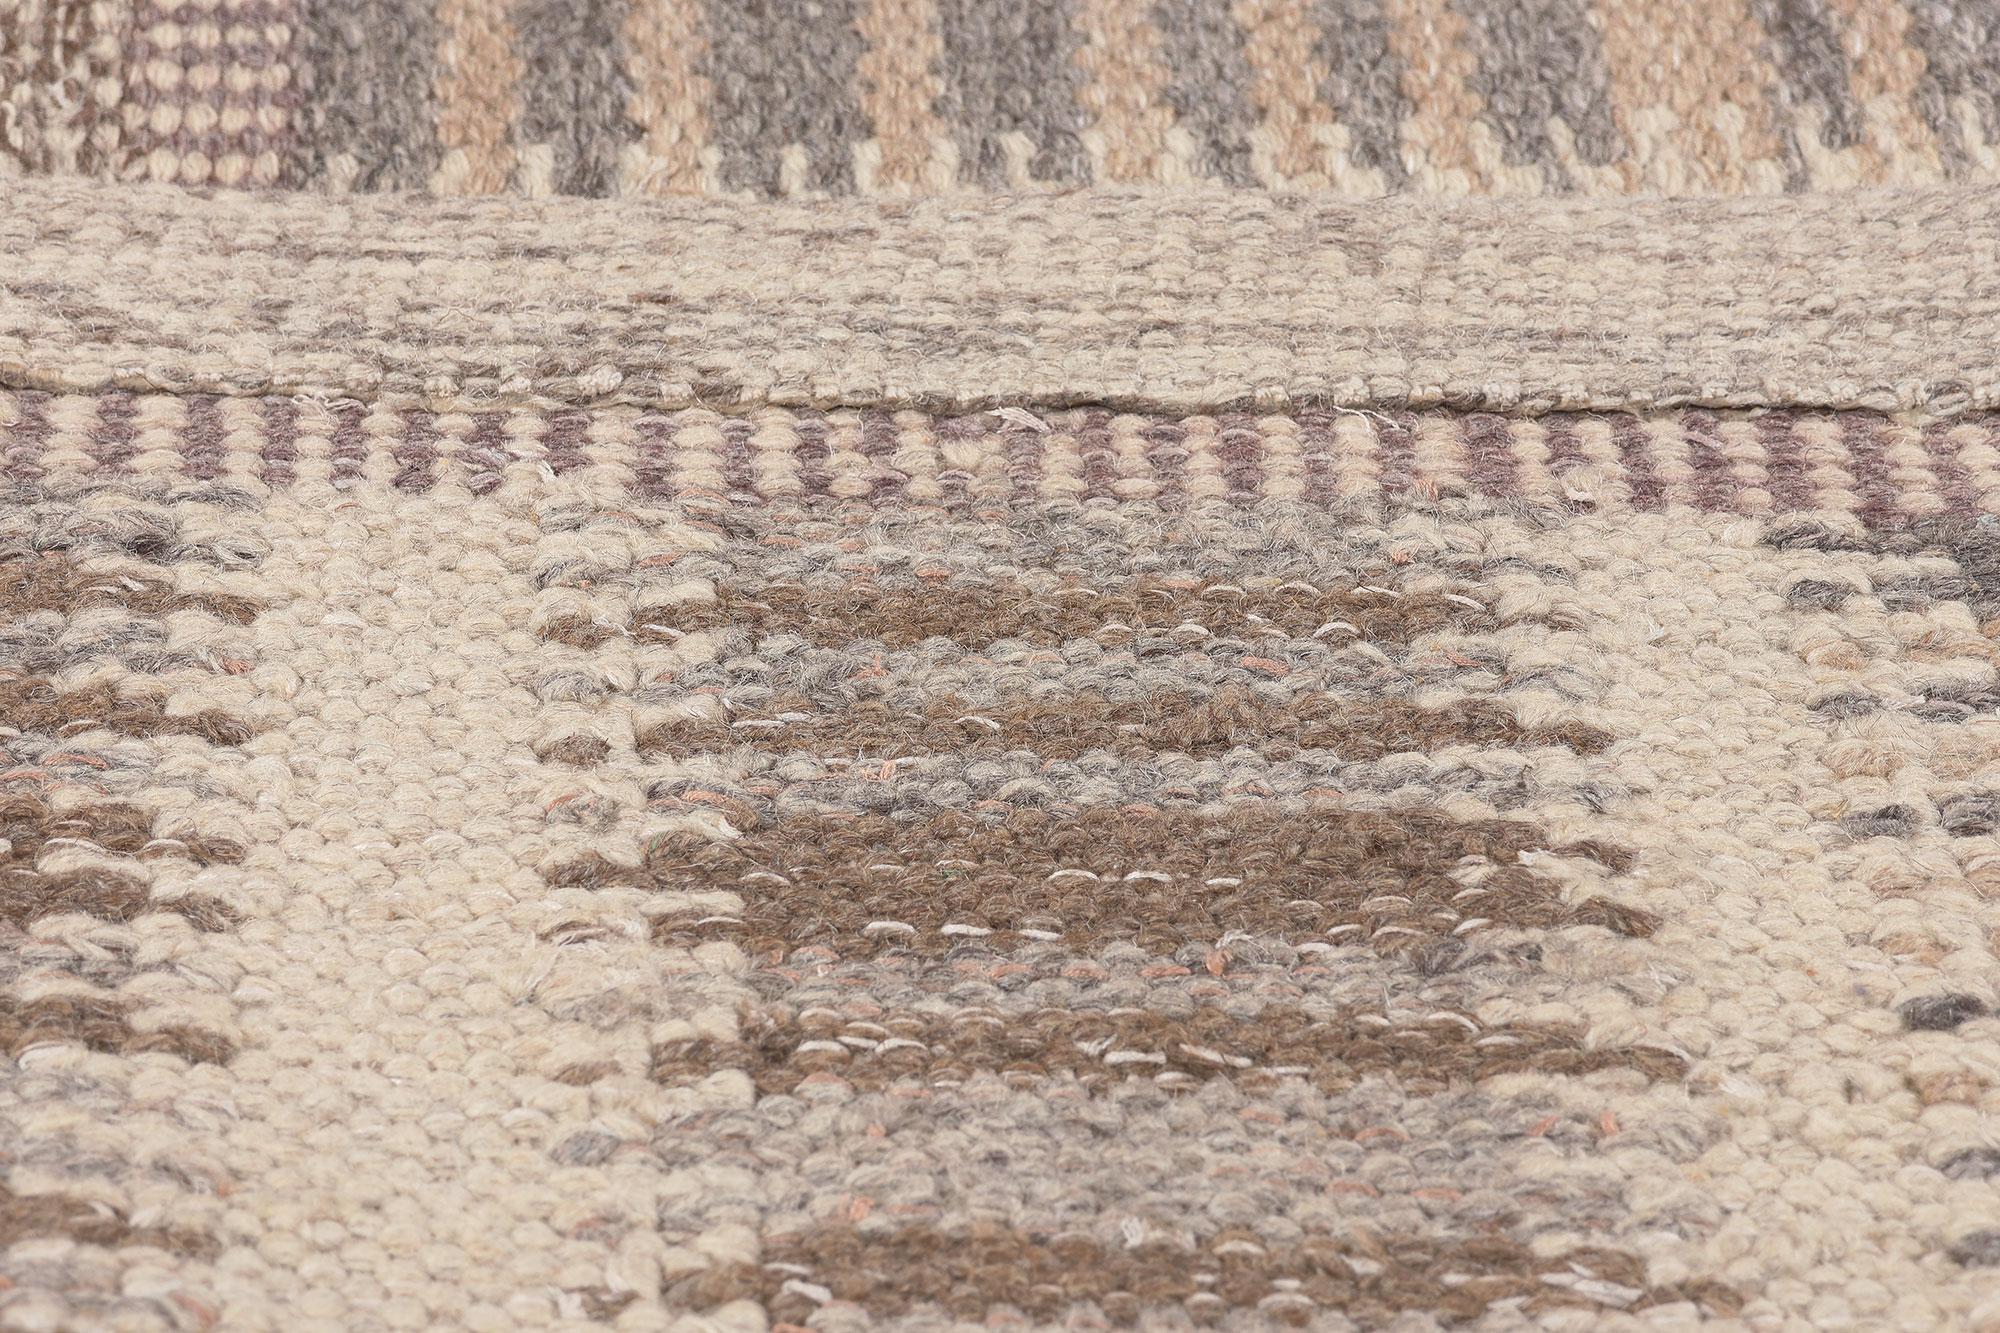 Earth-Tone Swedish Inspired Kilim Rug, Scandinavian Modern Style Meets Shibui In New Condition For Sale In Dallas, TX